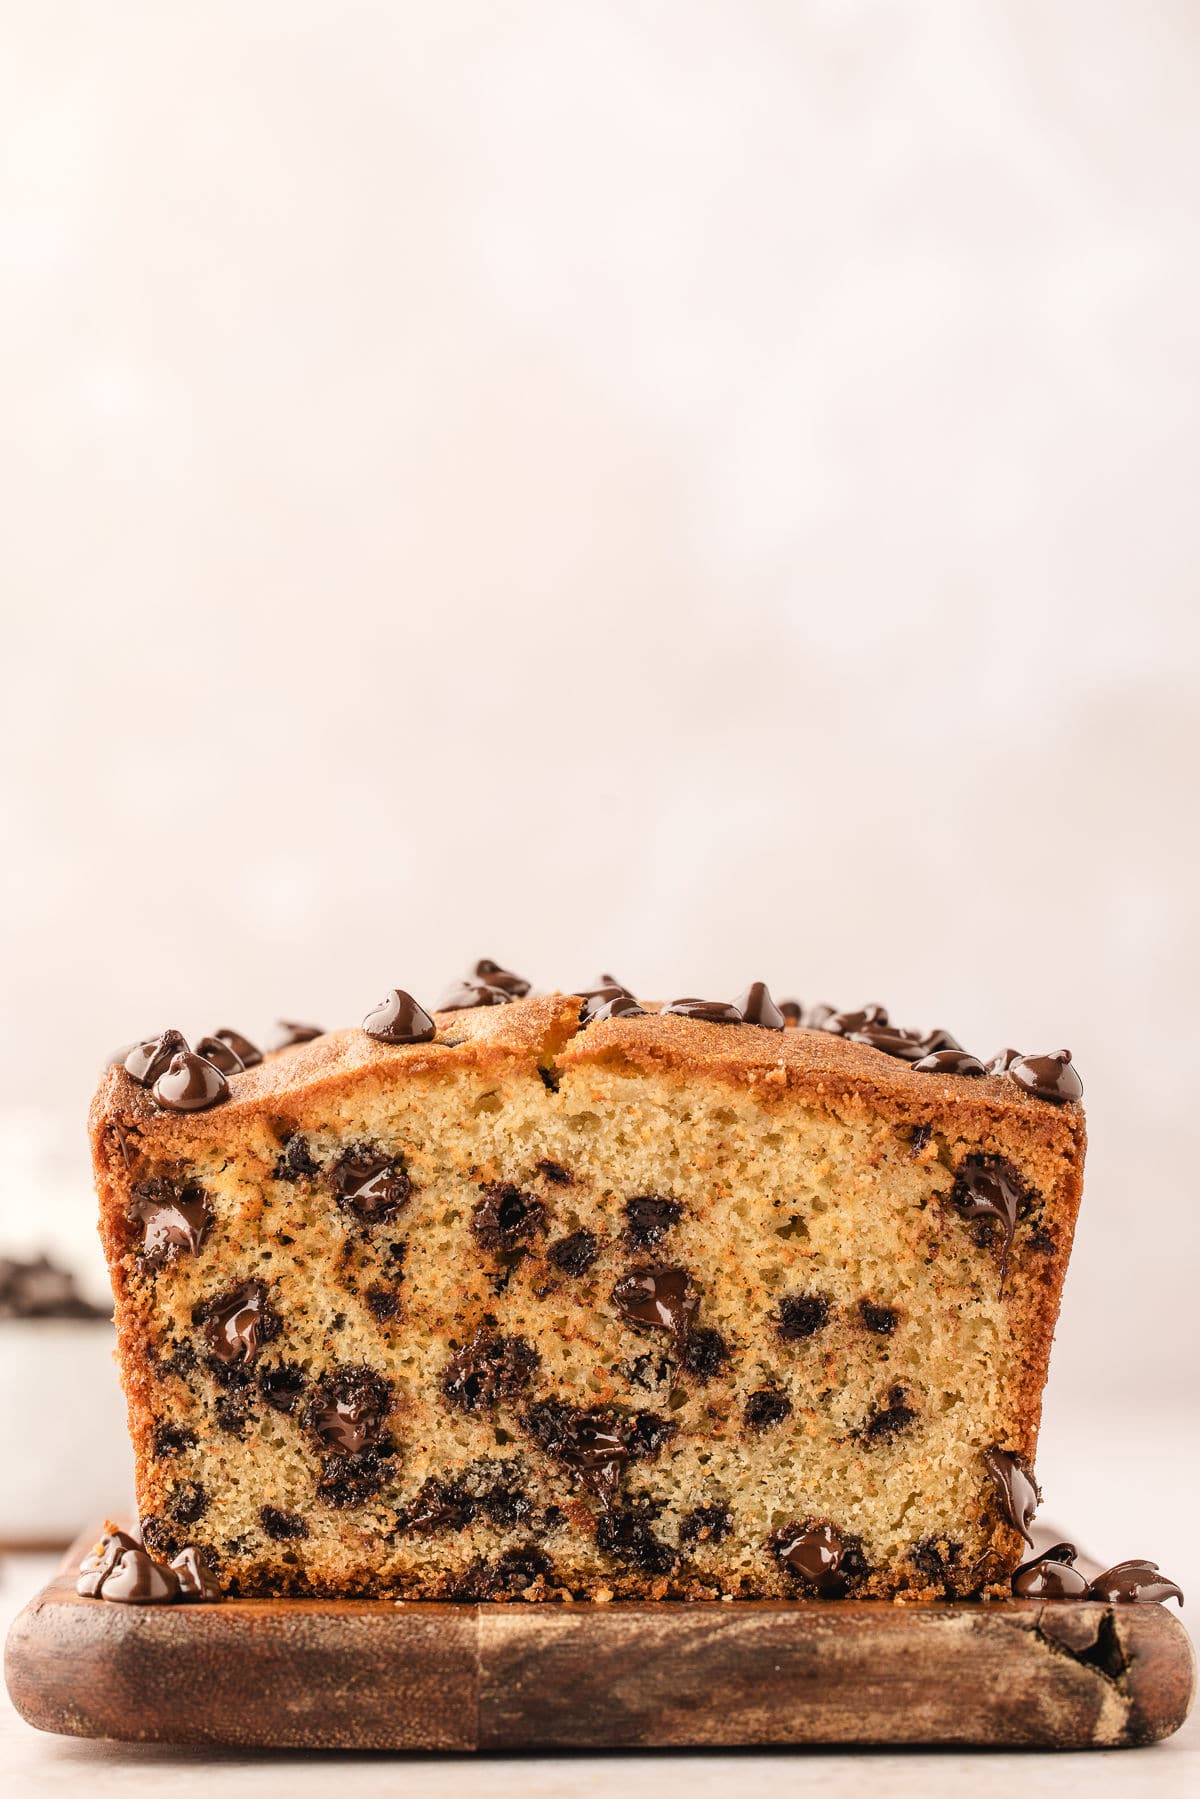 A cut chocolate chip loaf cake on a wooden cutting board.